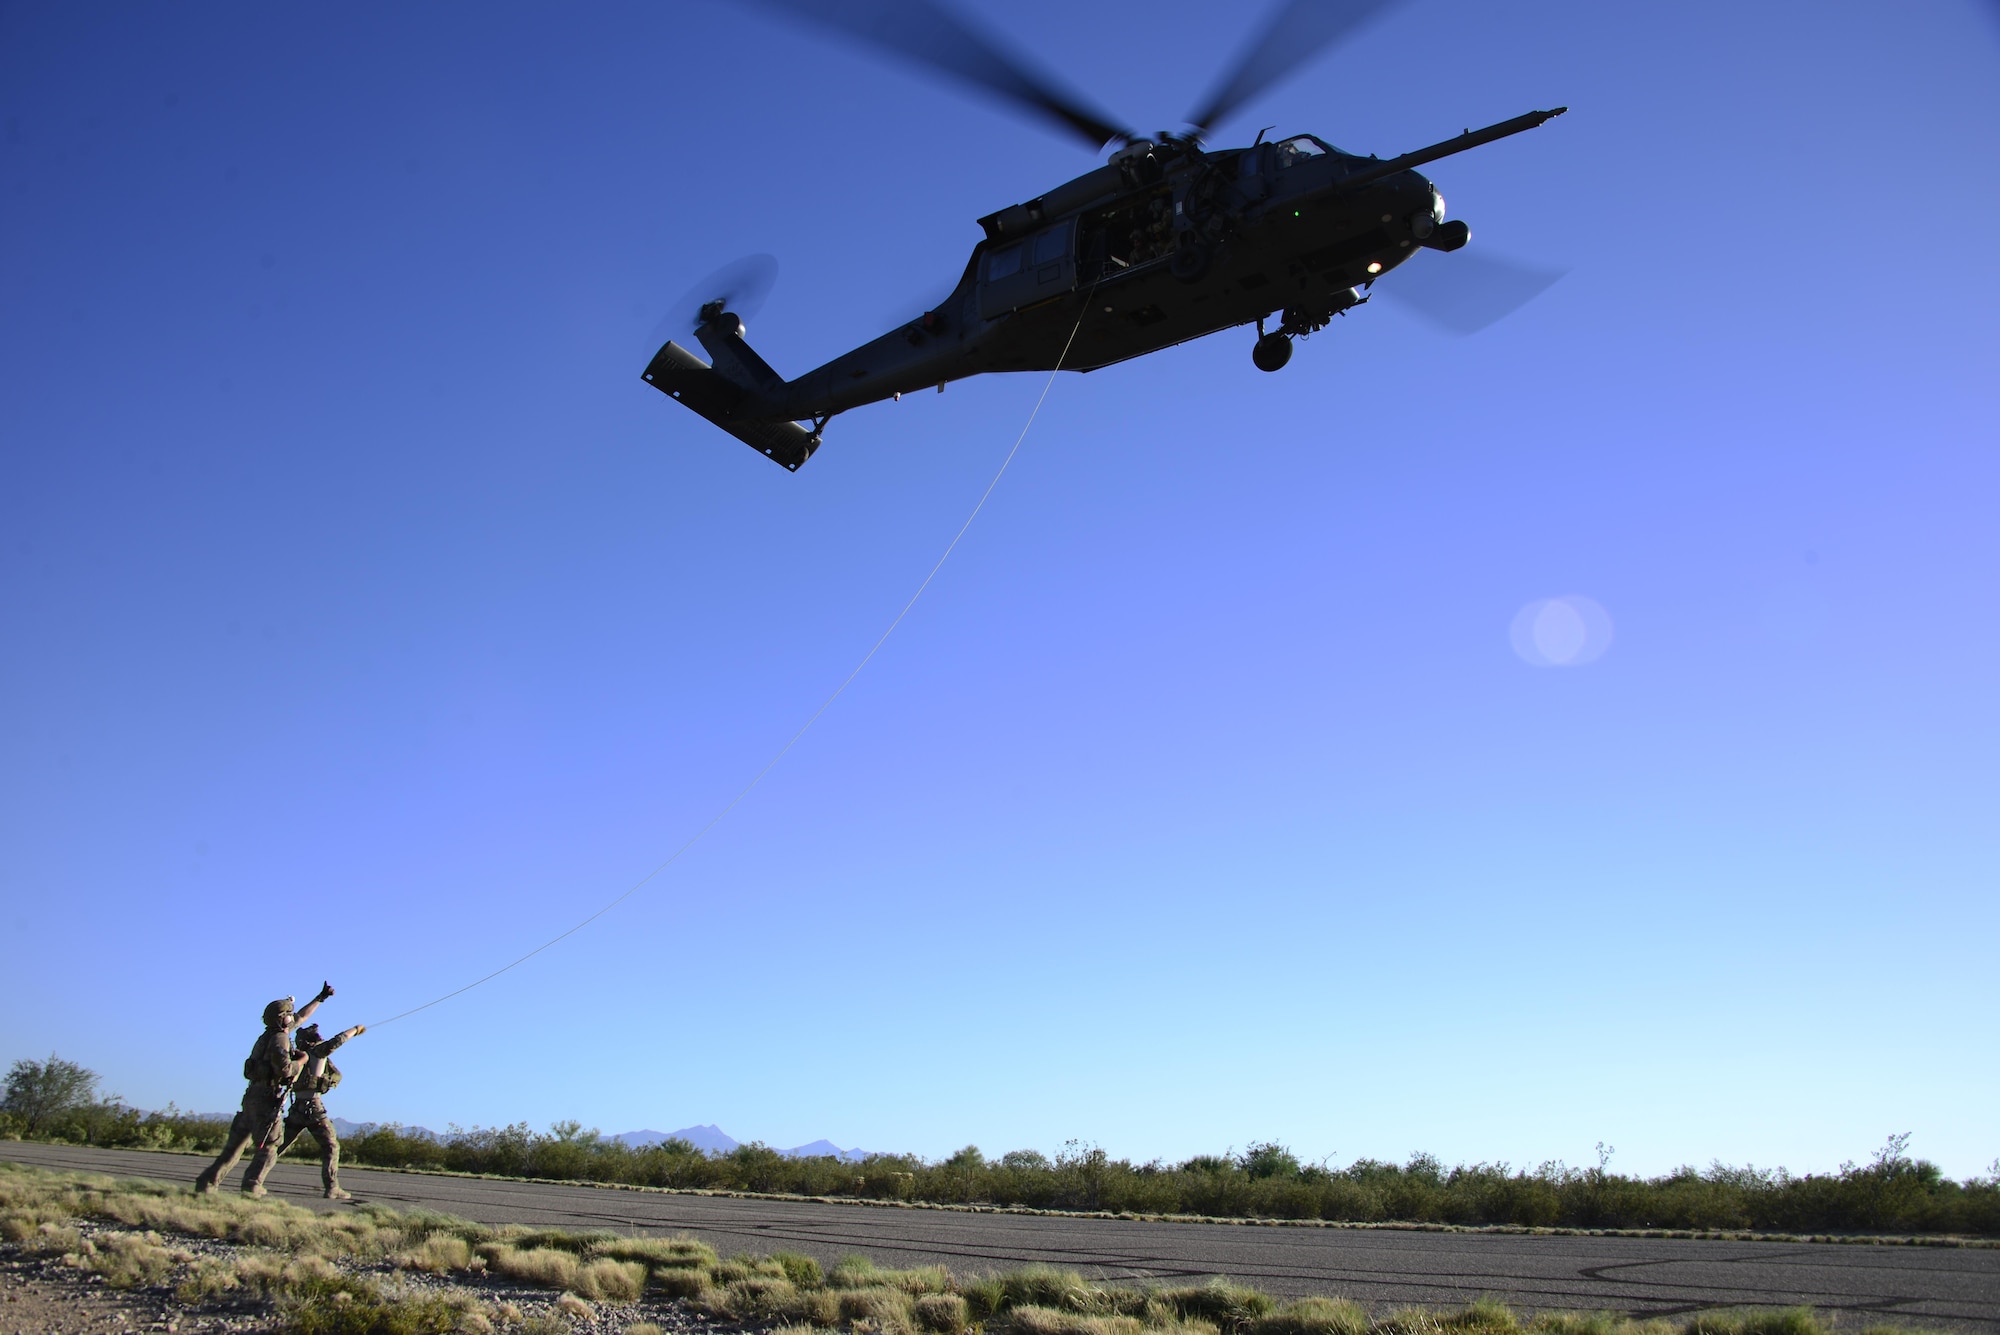 Pararescuemen assigned to the 48th Rescue Squadron signal to an Airman in an HH-60G Pave Hawk during alternate insertion/extraction training at Davis-Monthan Air Force Base, Ariz., Oct. 18, 2016. The Airmen are required to perform AIE training every year and do multiple iterations throughout the year to maintain proficiency in all the methods. (U.S. Air Force photo by Senior Airman Betty R. Chevalier)